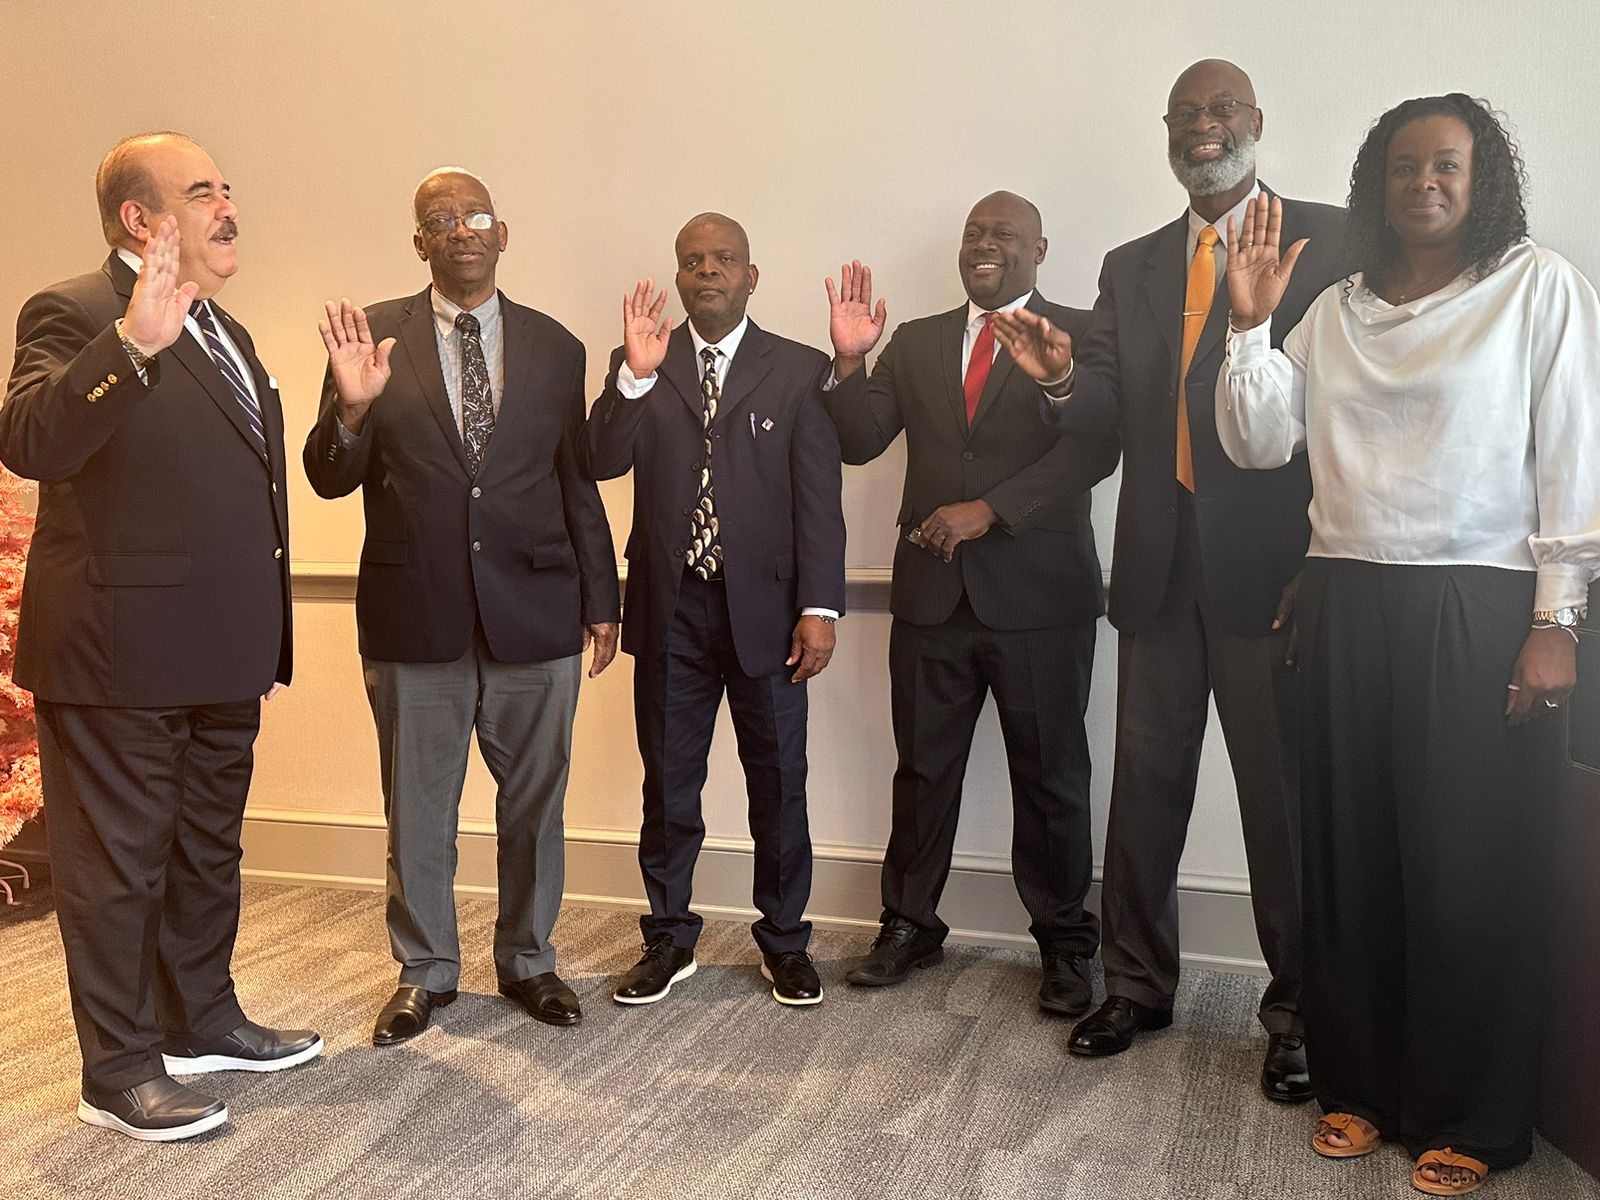 Successful Conclusion to the 2023 ECVA Congress in St. Kitts